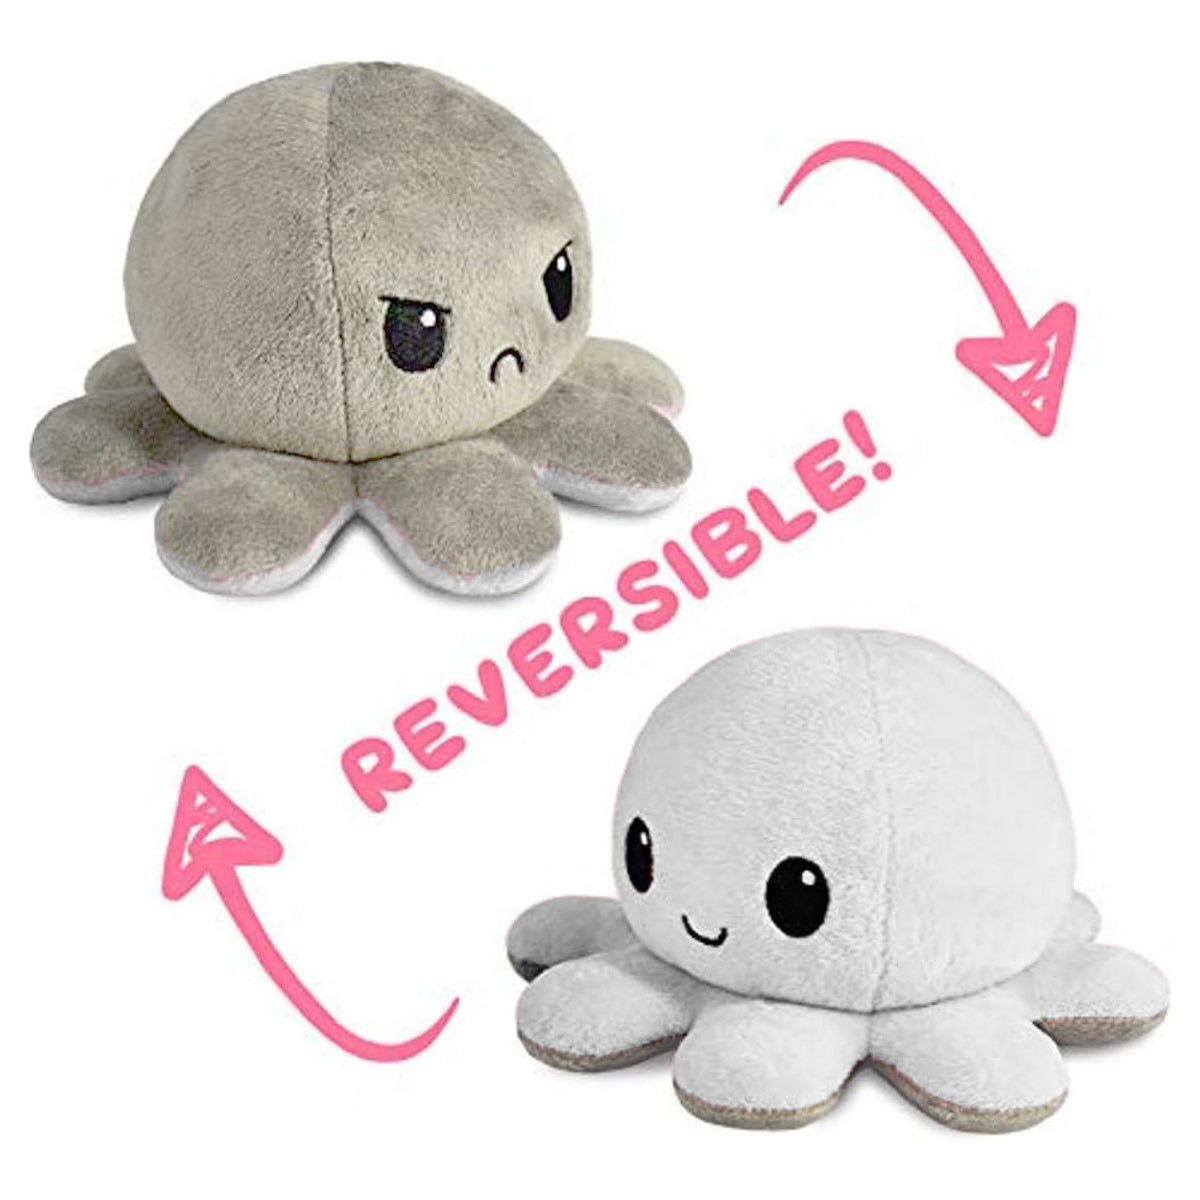 Reversible Octopus Plushie, Happy + Angry - Cute Sensory Fidget To Show Your Mood!